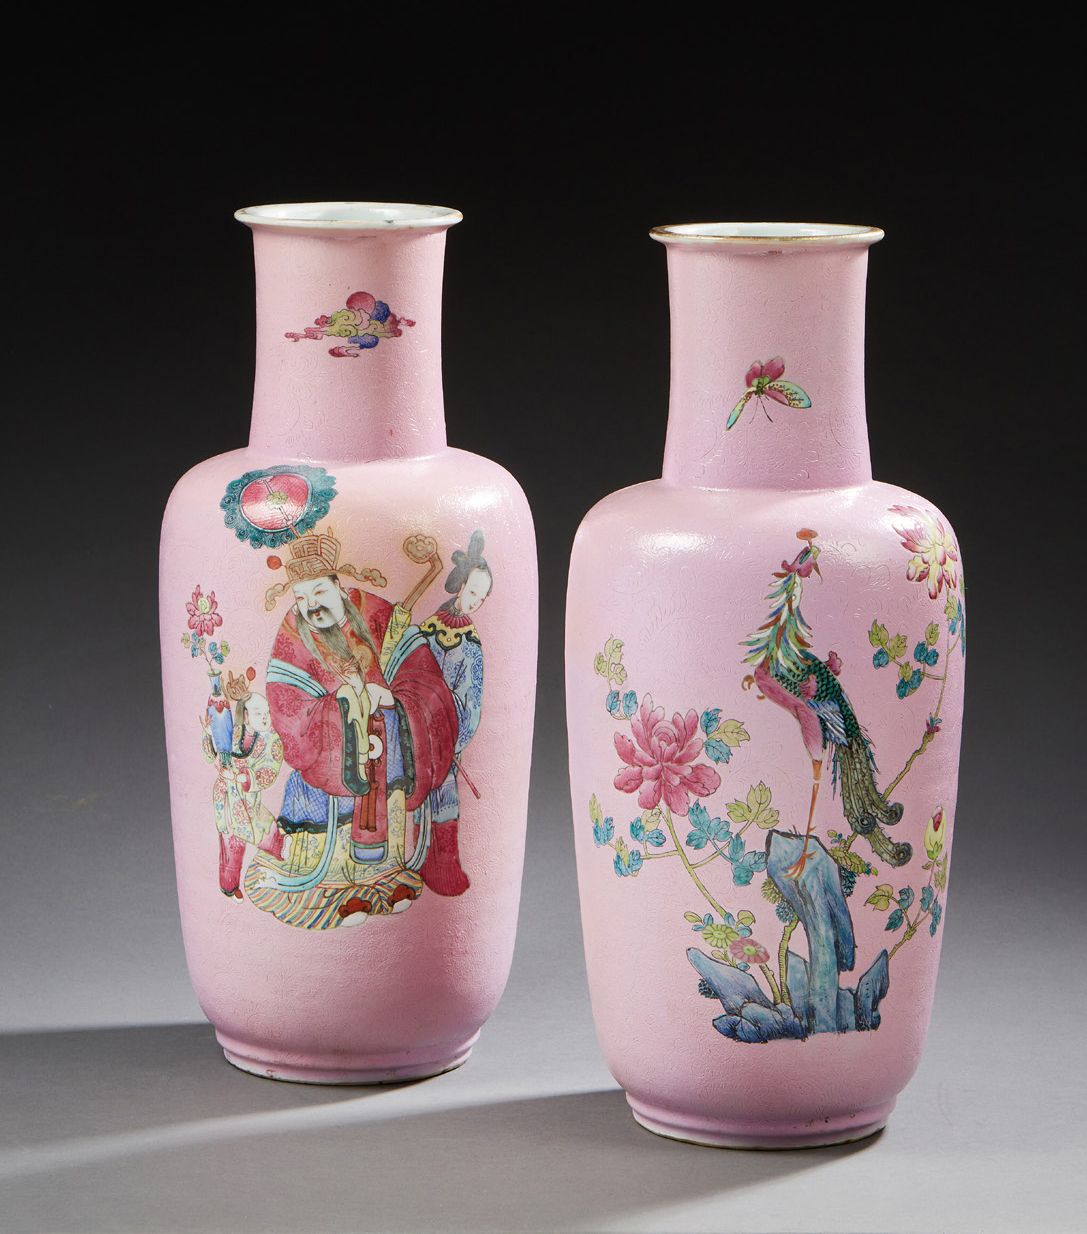 CHINE A pair of narrow-necked cylindrical porcelain vases with a pink background&hellip;